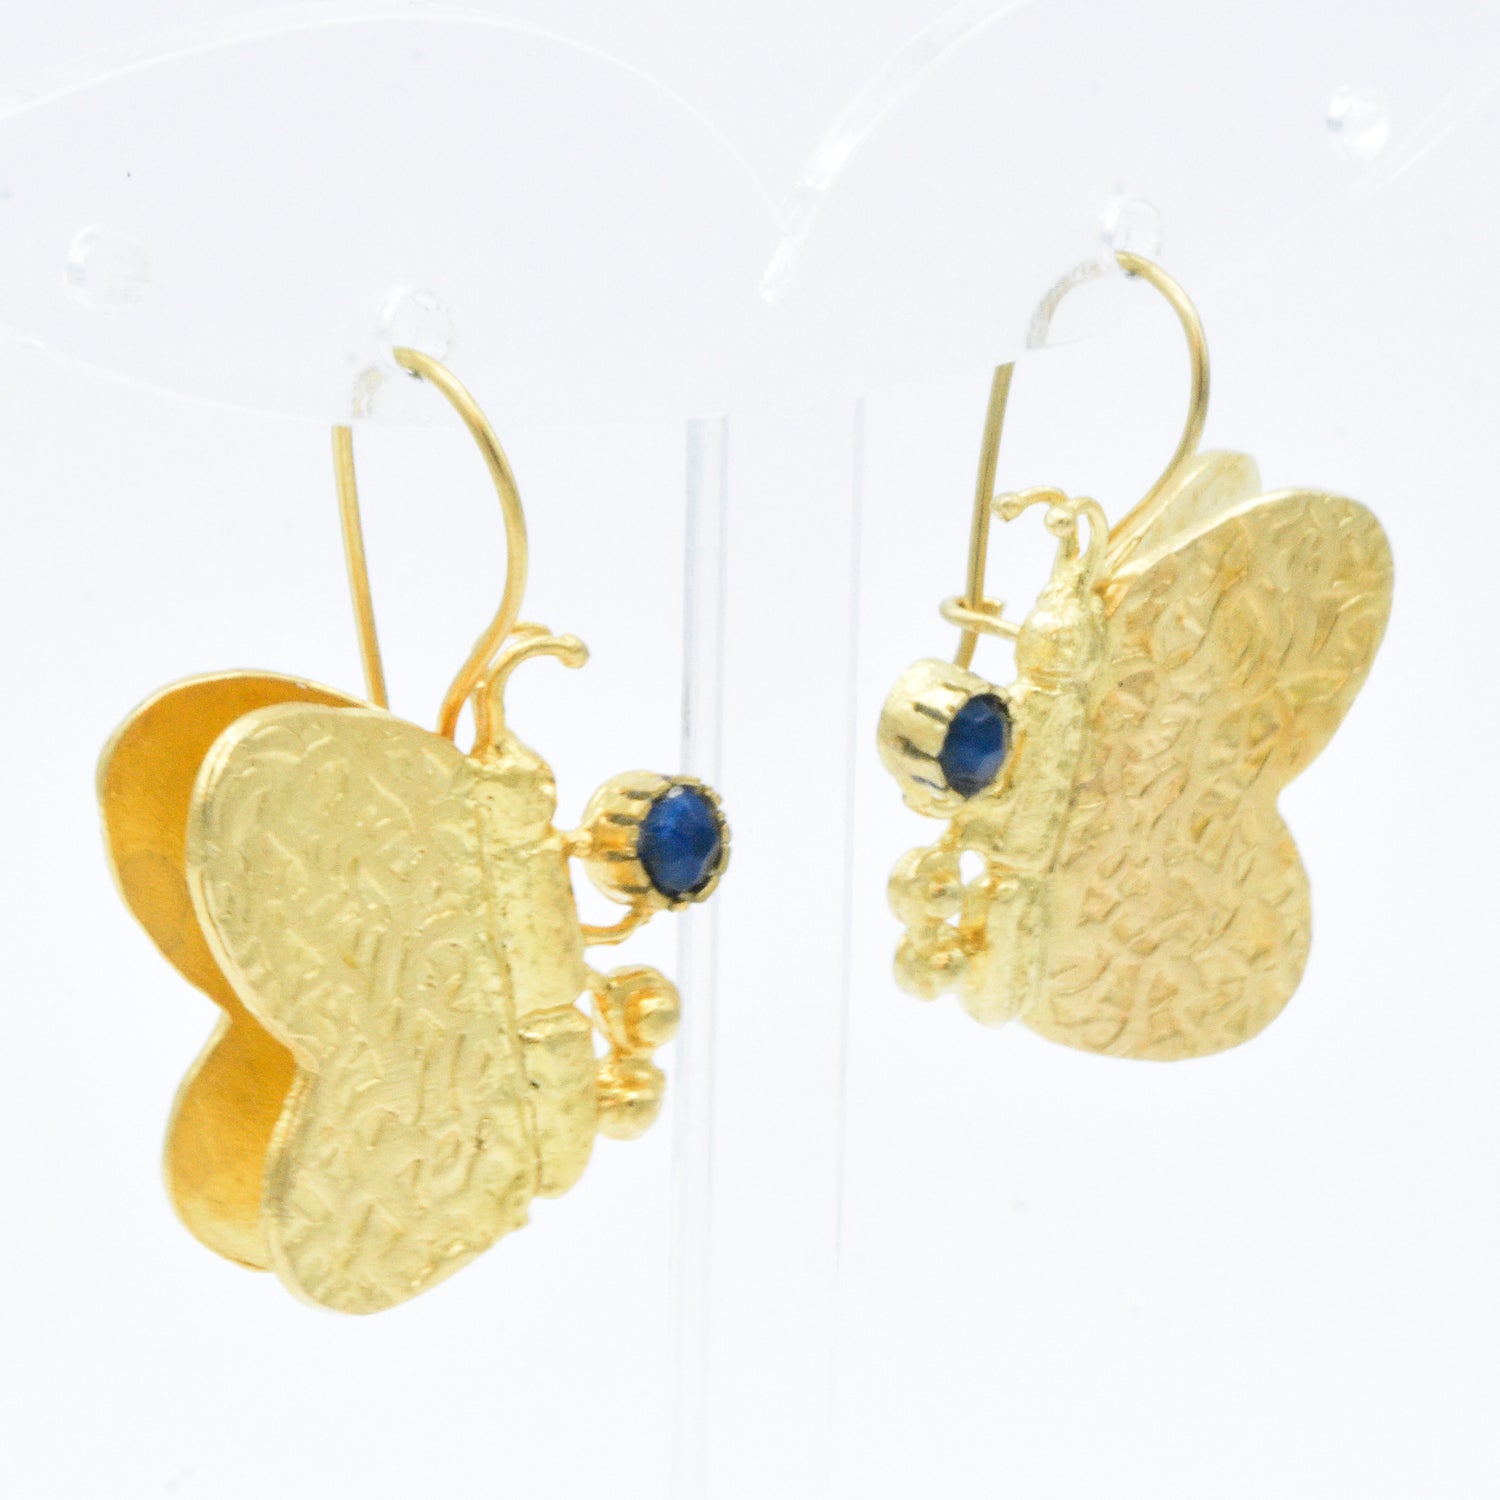 Aylas Agate Butterfly earrings - 21ct Gold plated semi precious gemstone - Handmade in Ottoman Style by Artisan